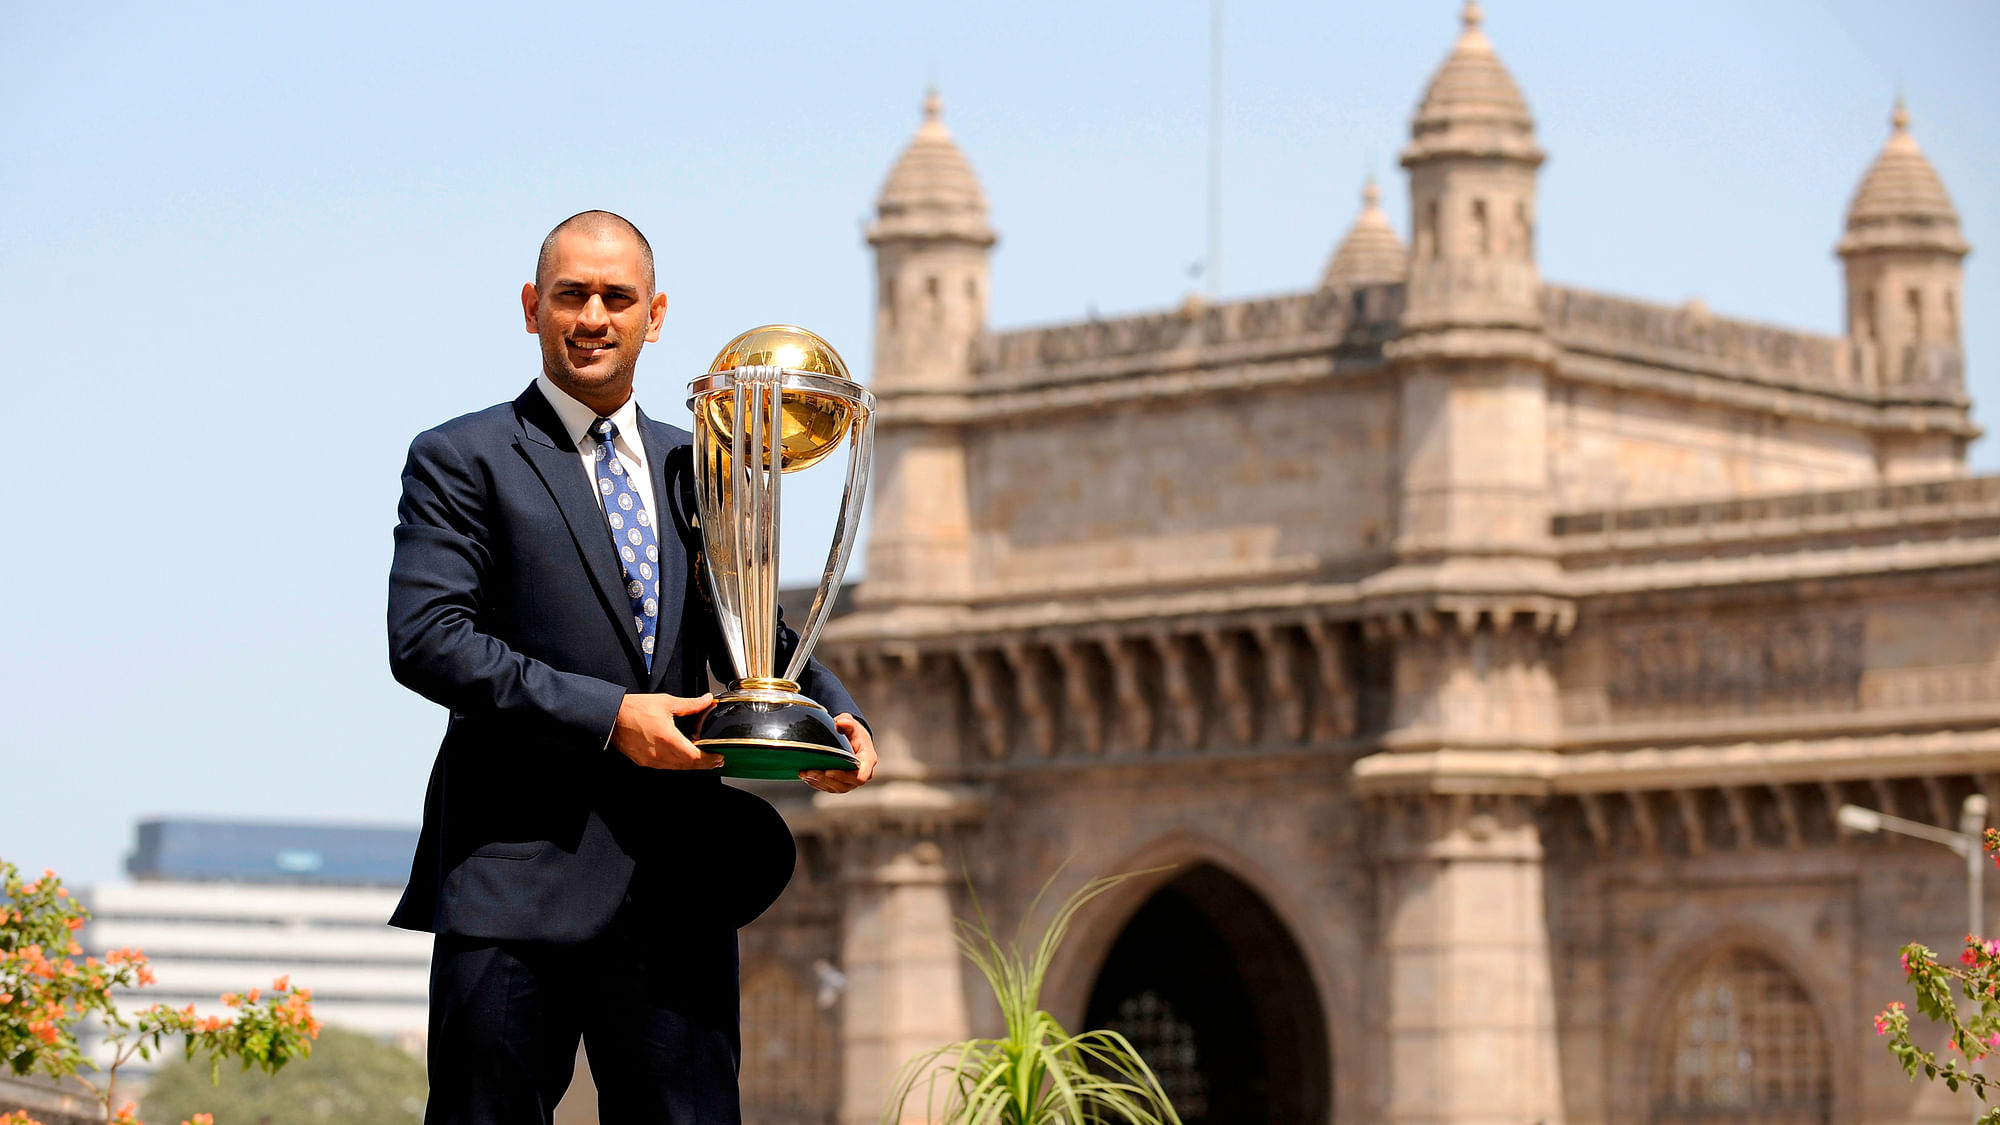 Mahendra Singh Dhoni poses with the World Cup trophy a day after winning the 2011 World Cup in Mumbai&nbsp;(Photo: Reuters)